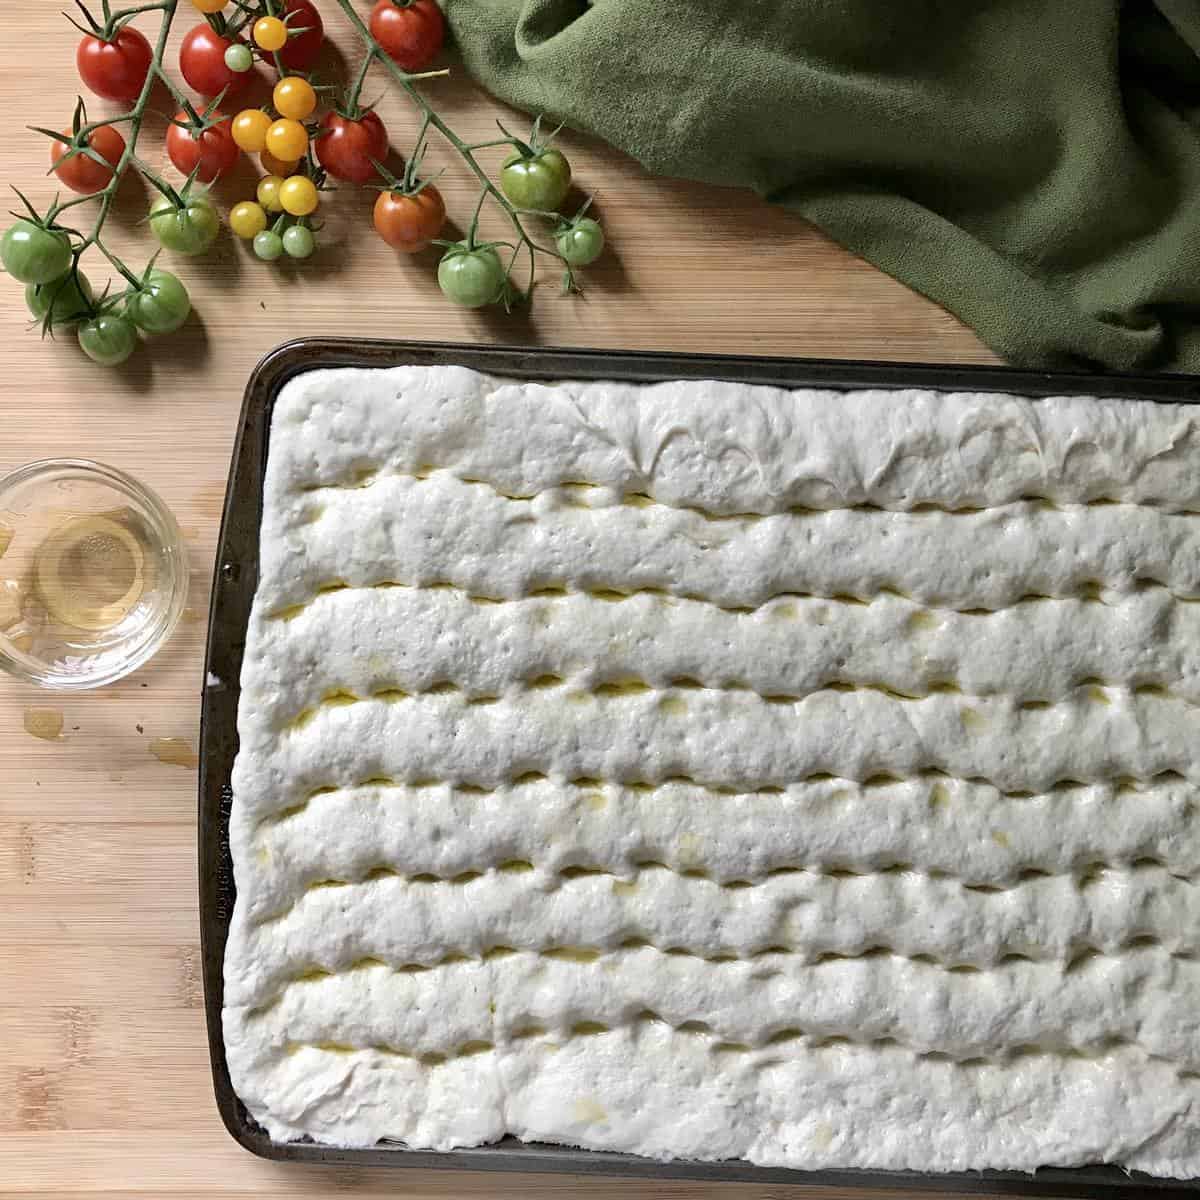 Dimpled focaccia bread in a sheet pan before baking. 